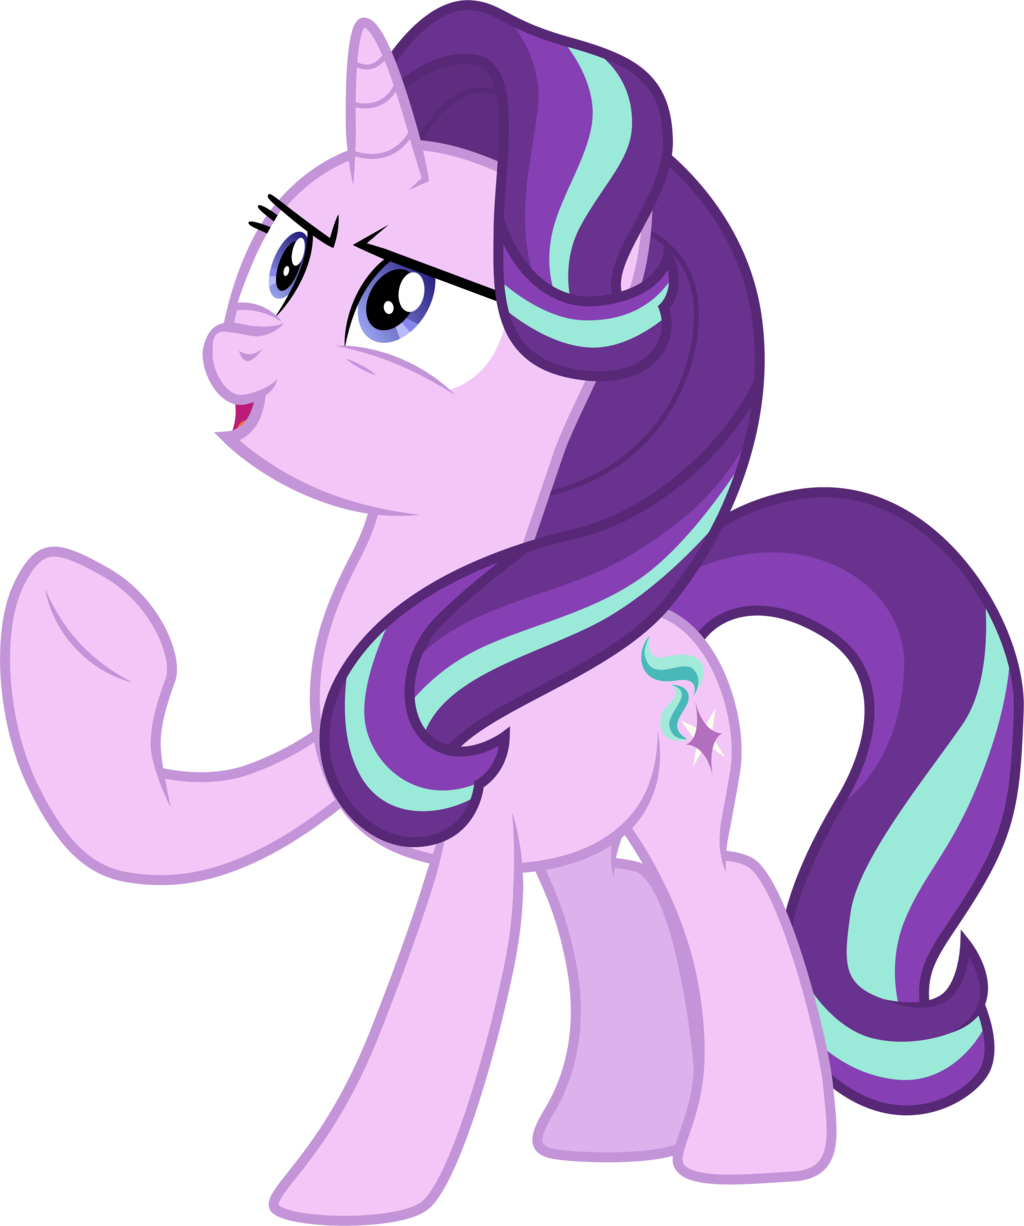 Equestria Daily - MLP Stuff!: Editorial: Why I Love Me Some Starlight  Glimmer, and How She Kinda Saved the Show For Me!